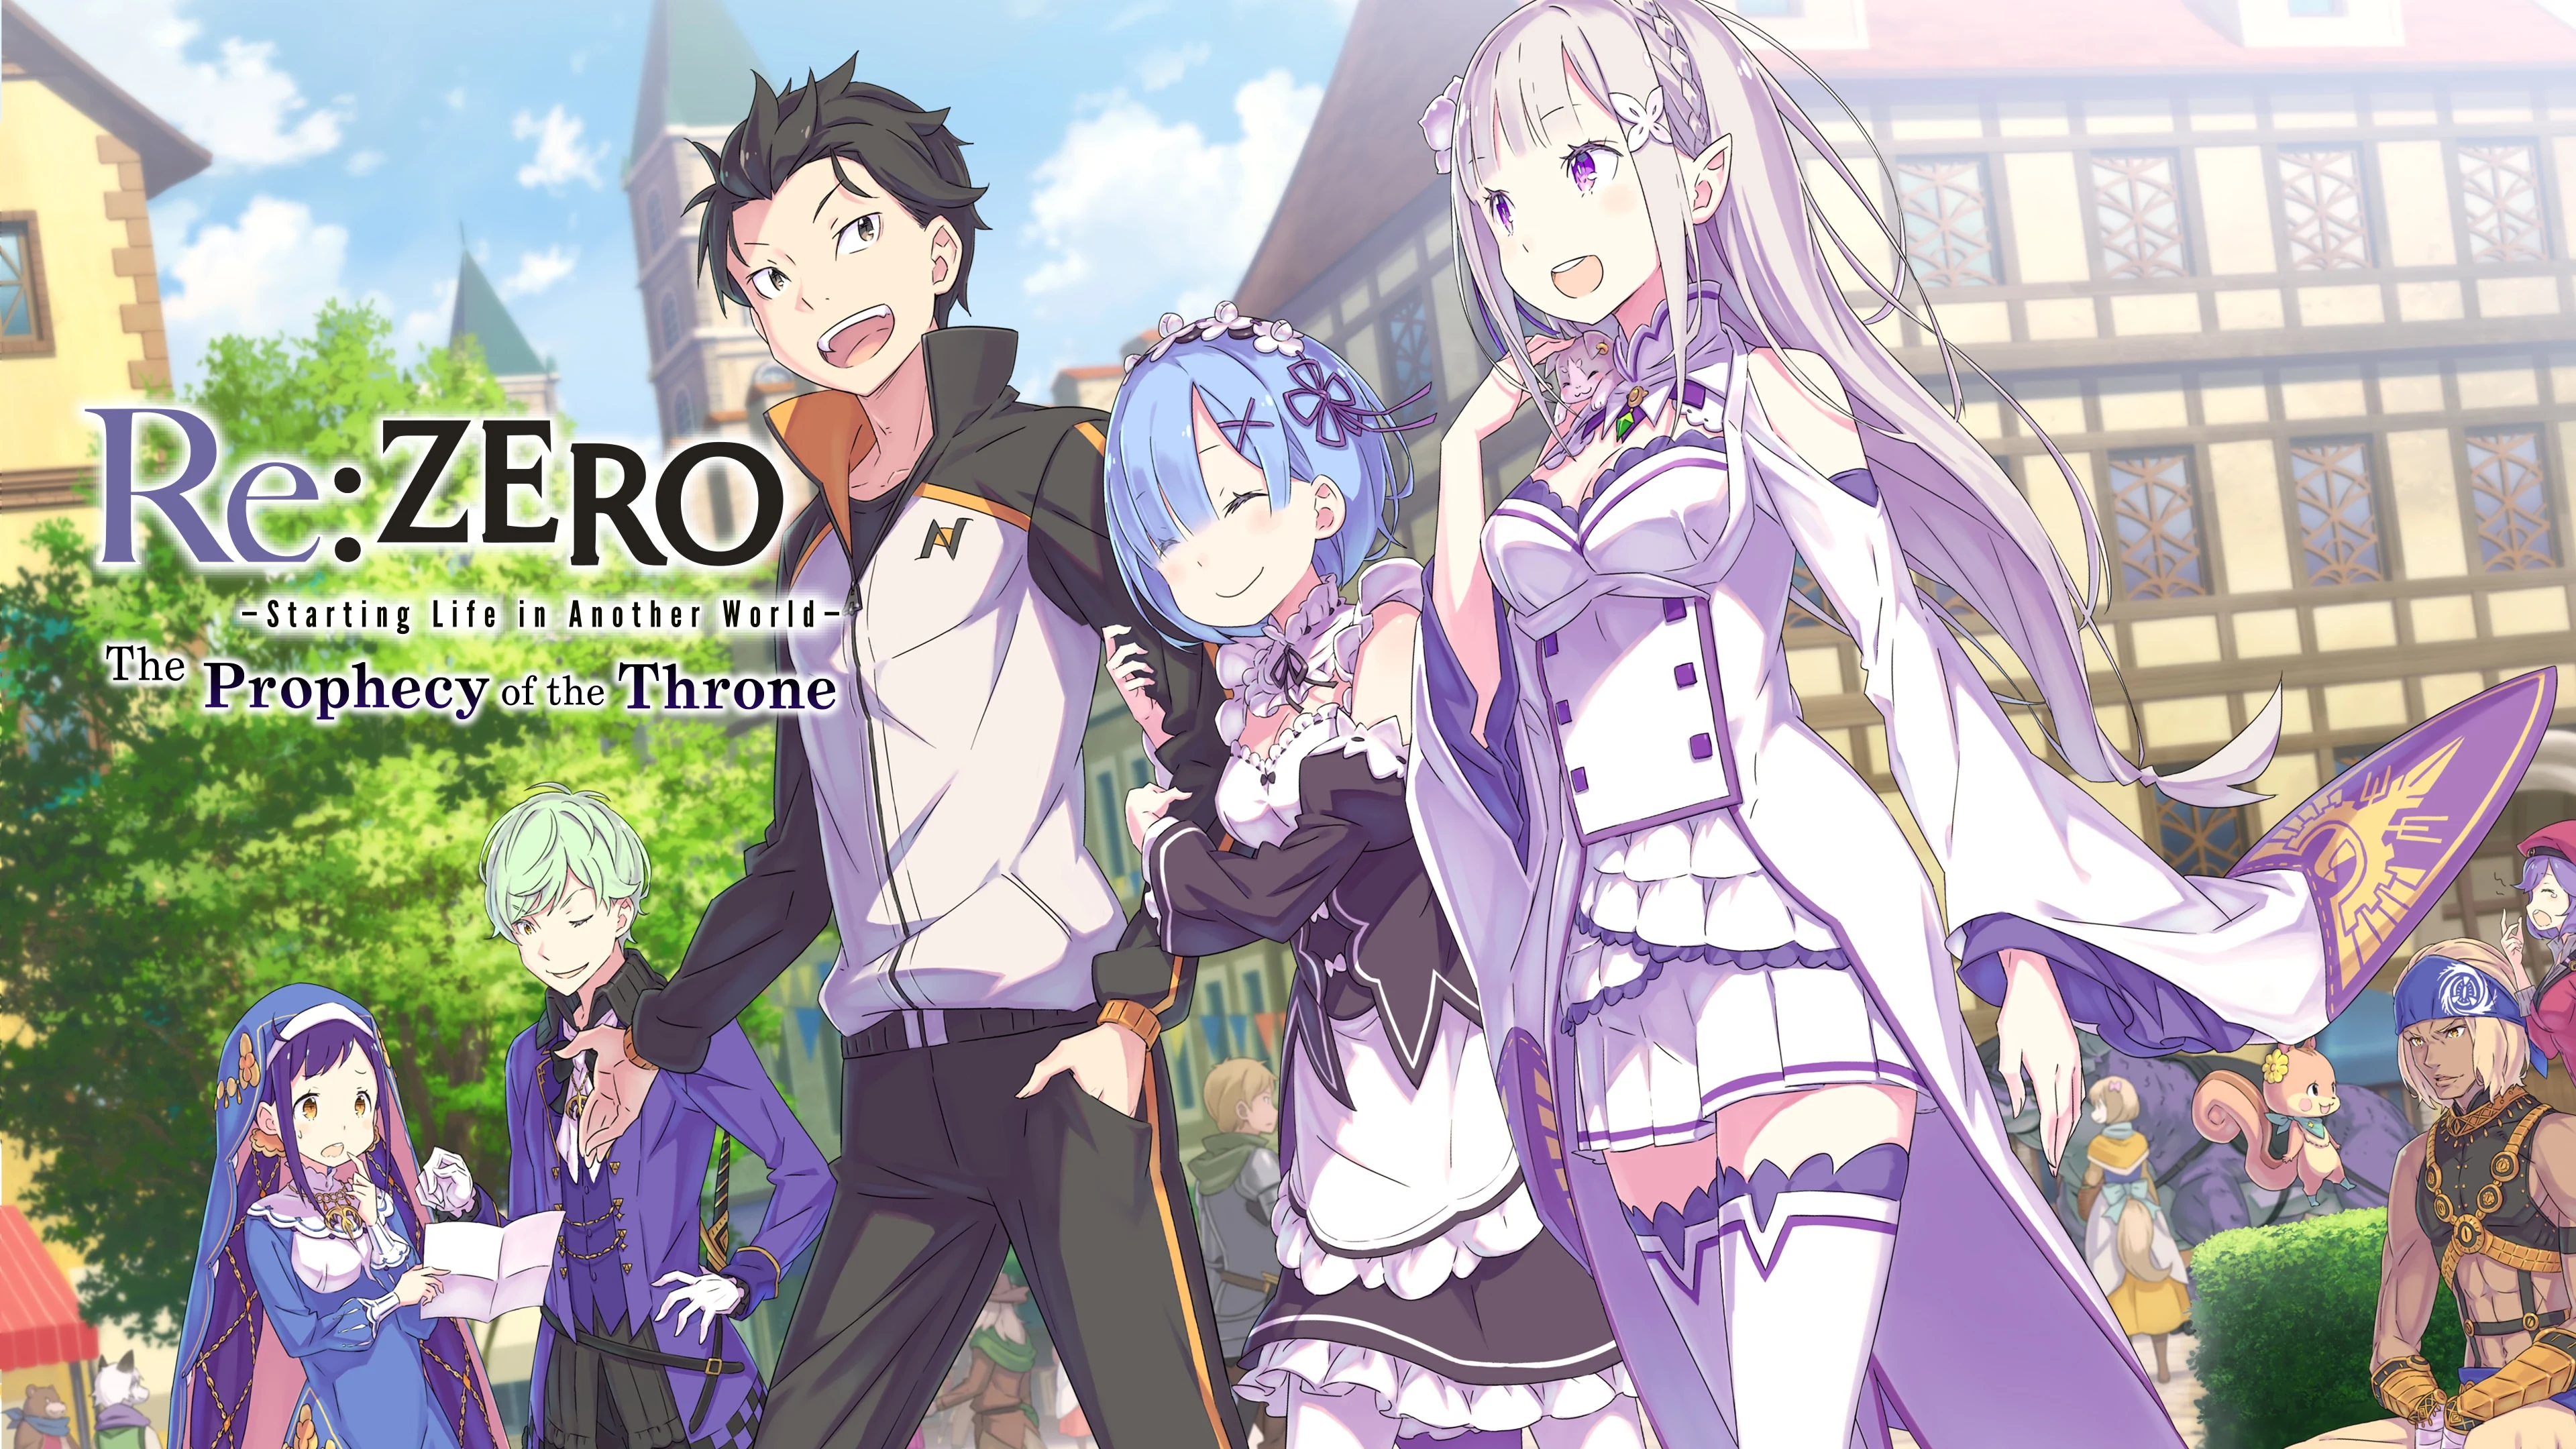 Re:Zero Watch Order: A Complete Guide for Anime Fans